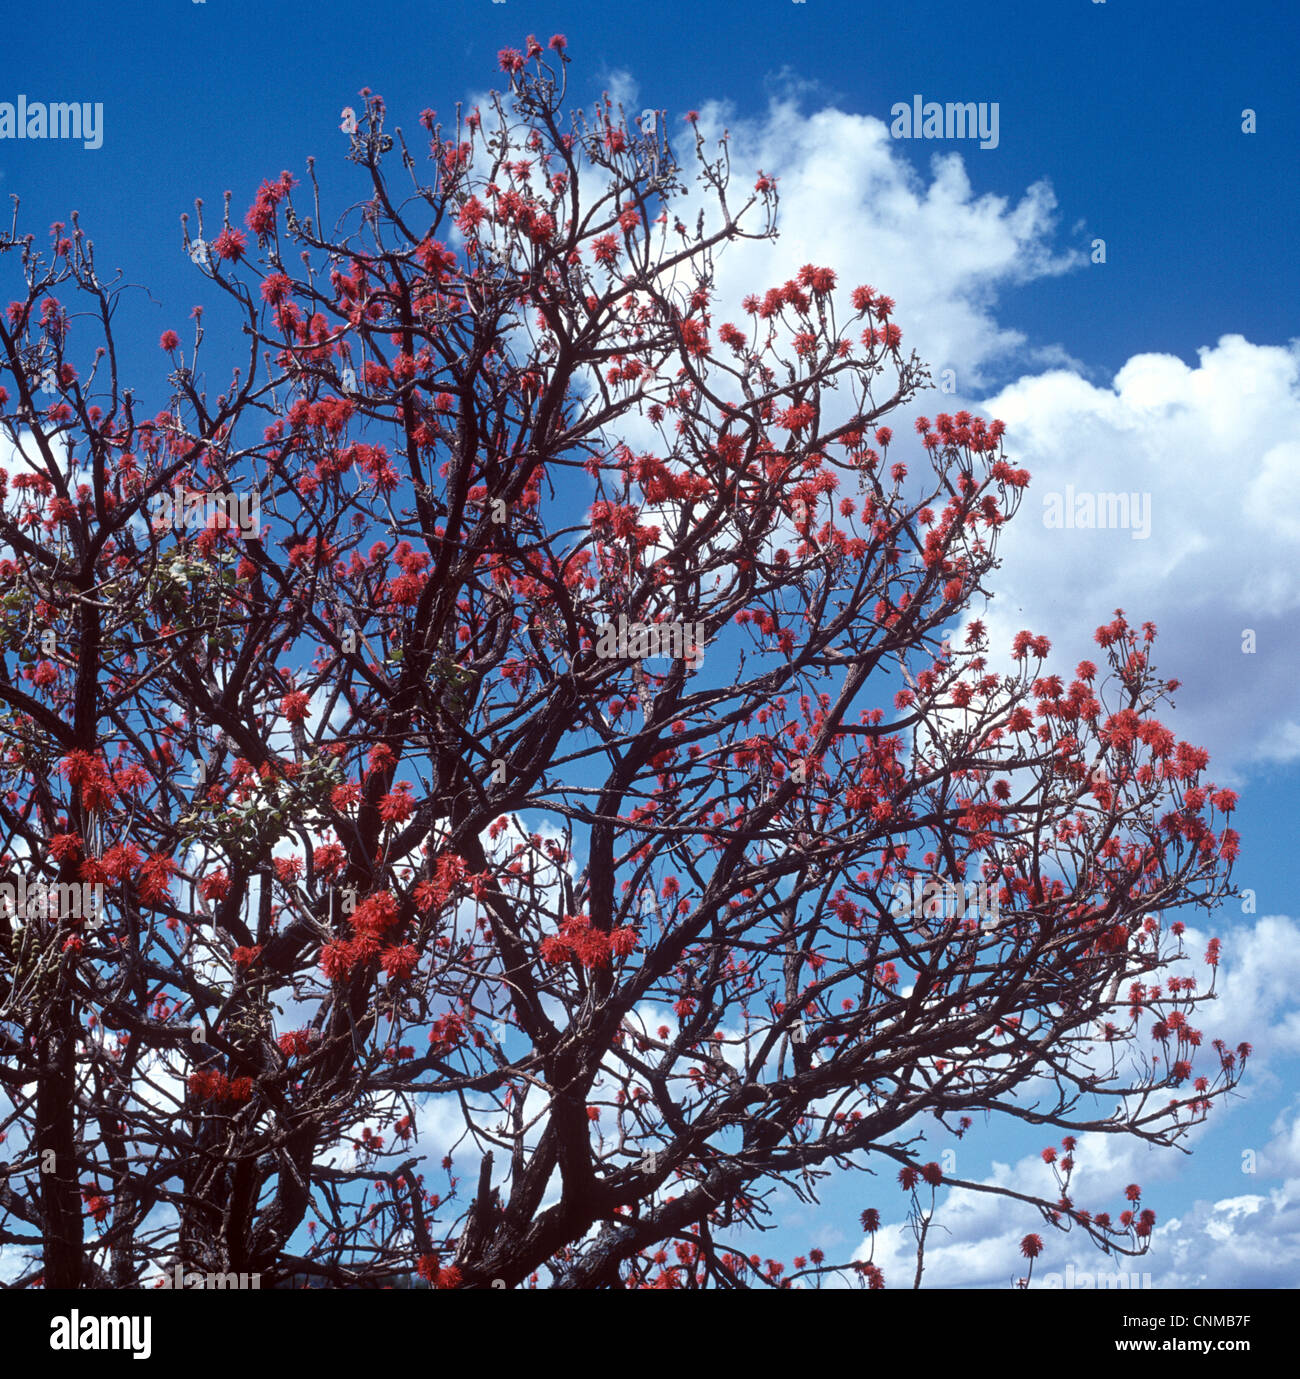 Tree - Coral (Erythrina abyssinica) showing branch in flower. Stock Photo